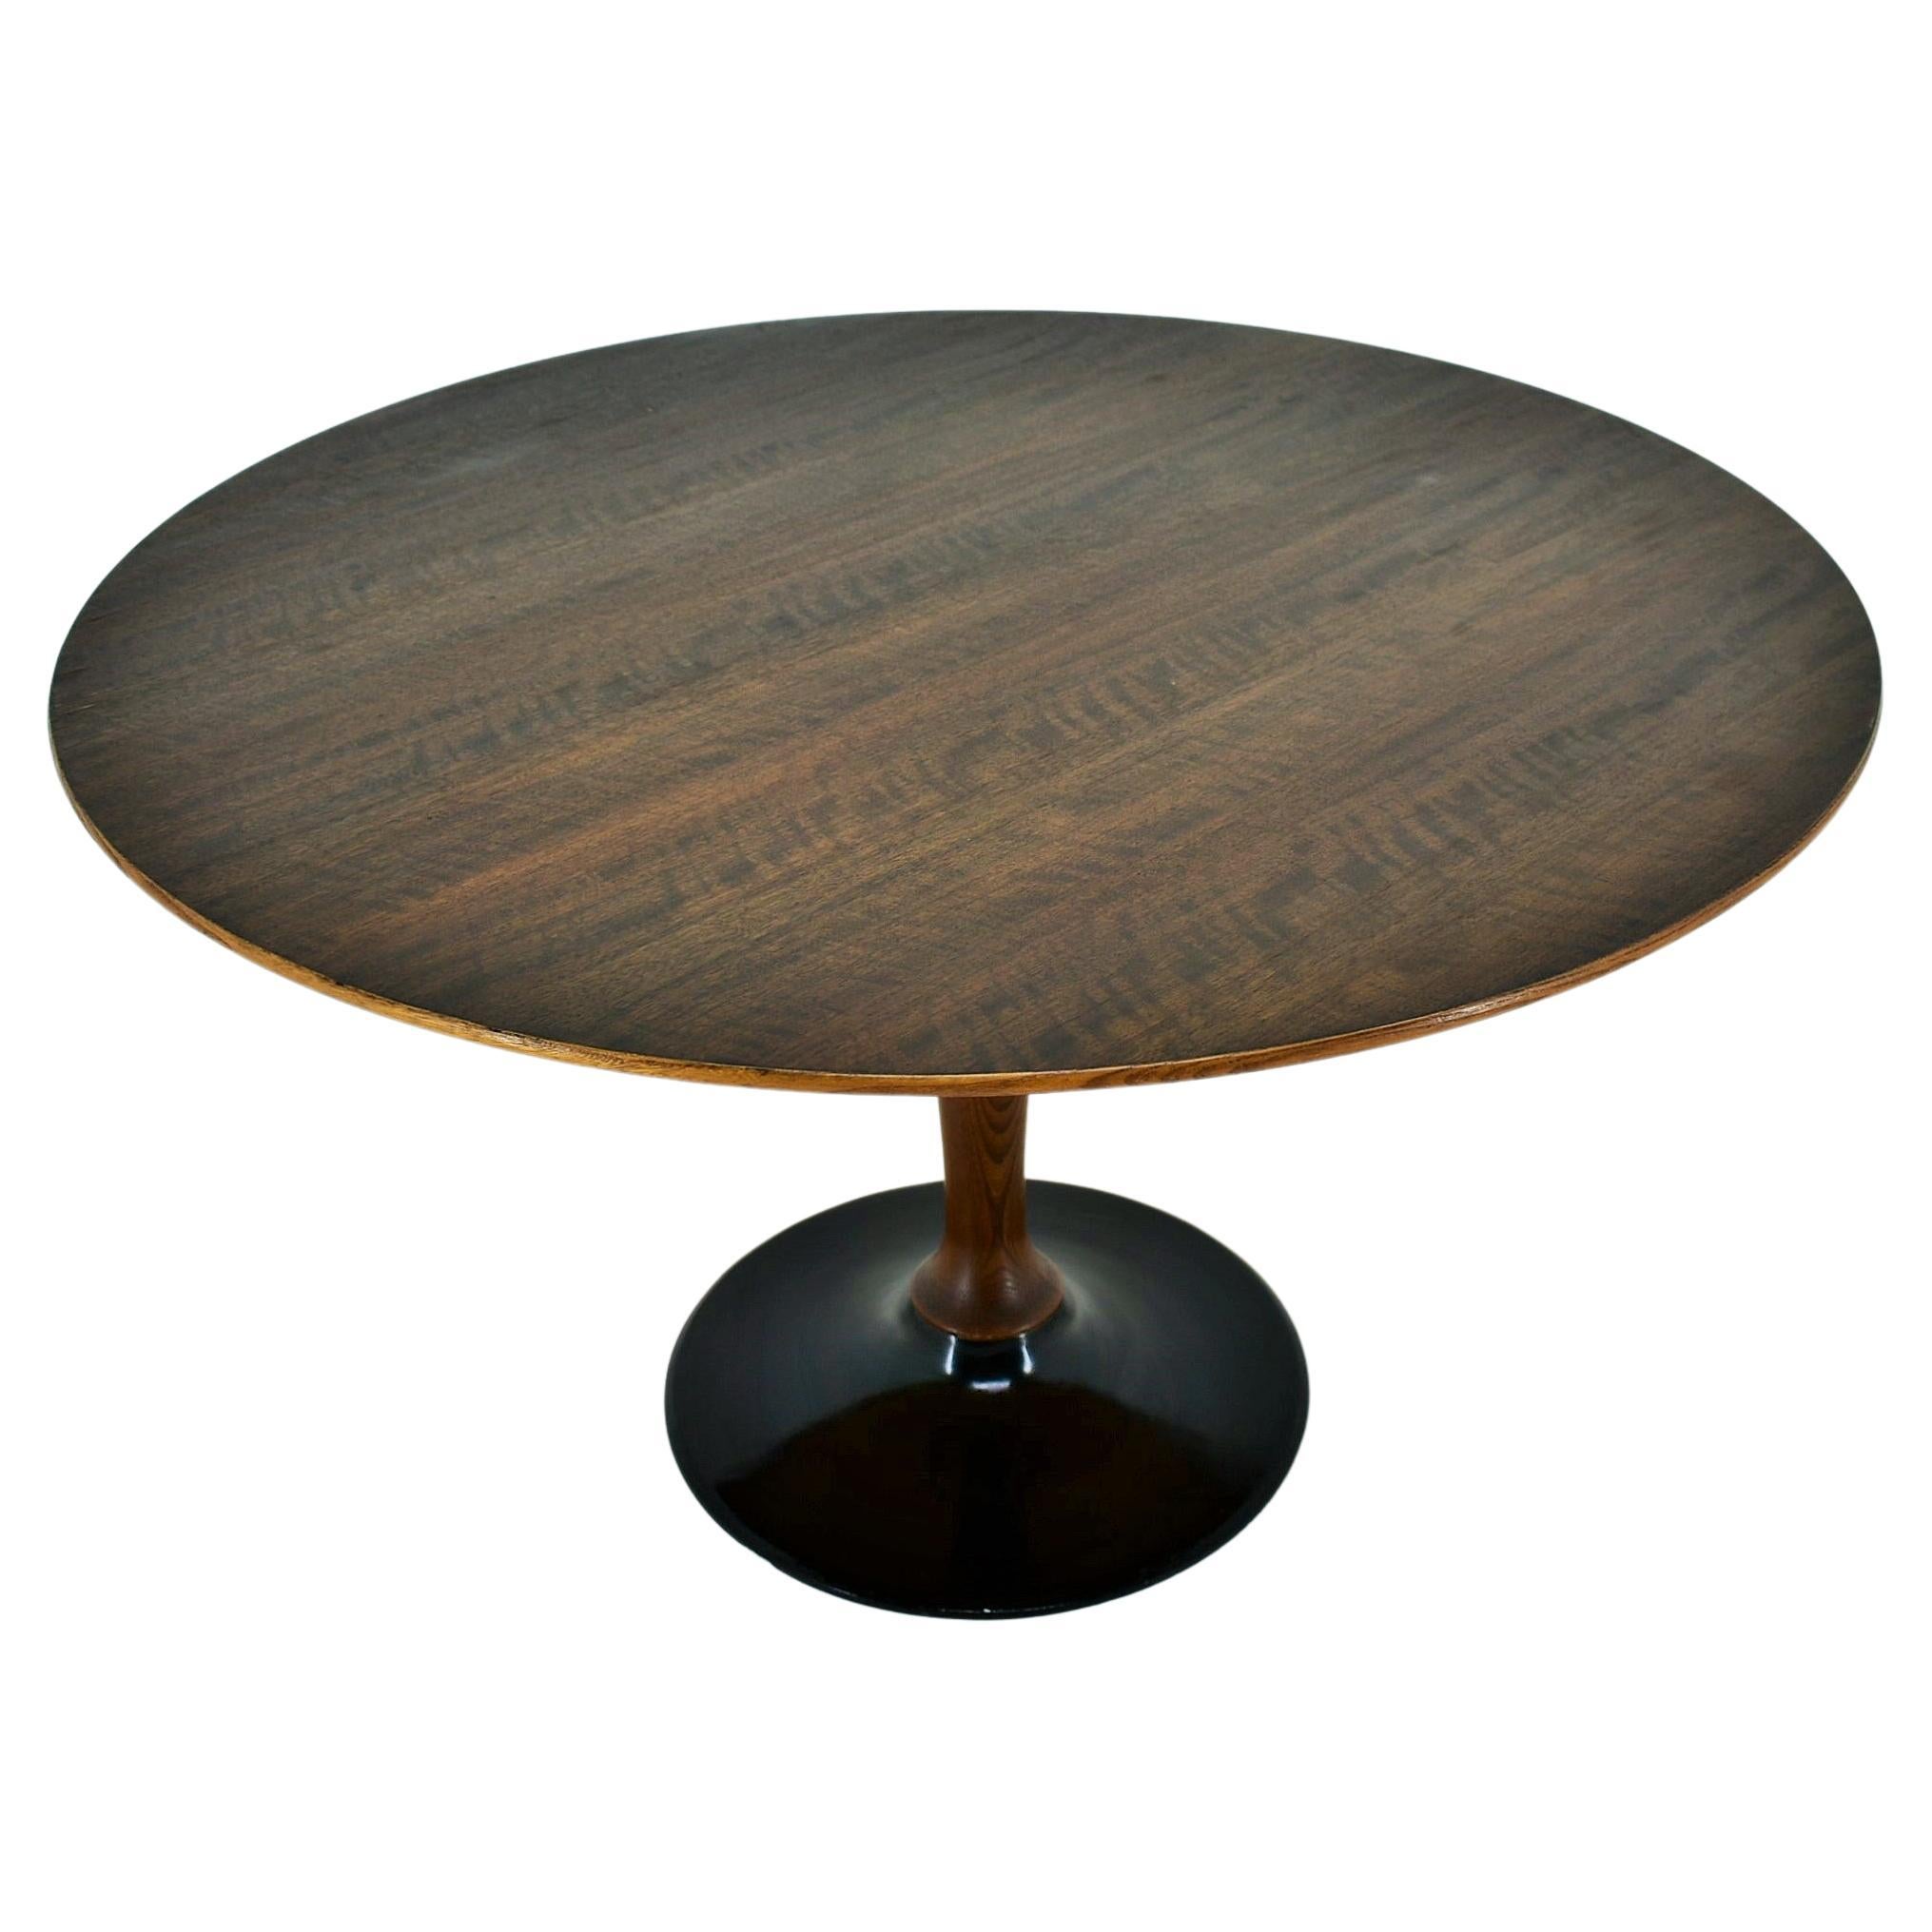 1960s Beech Round Dining Table, Czechoslovakia For Sale